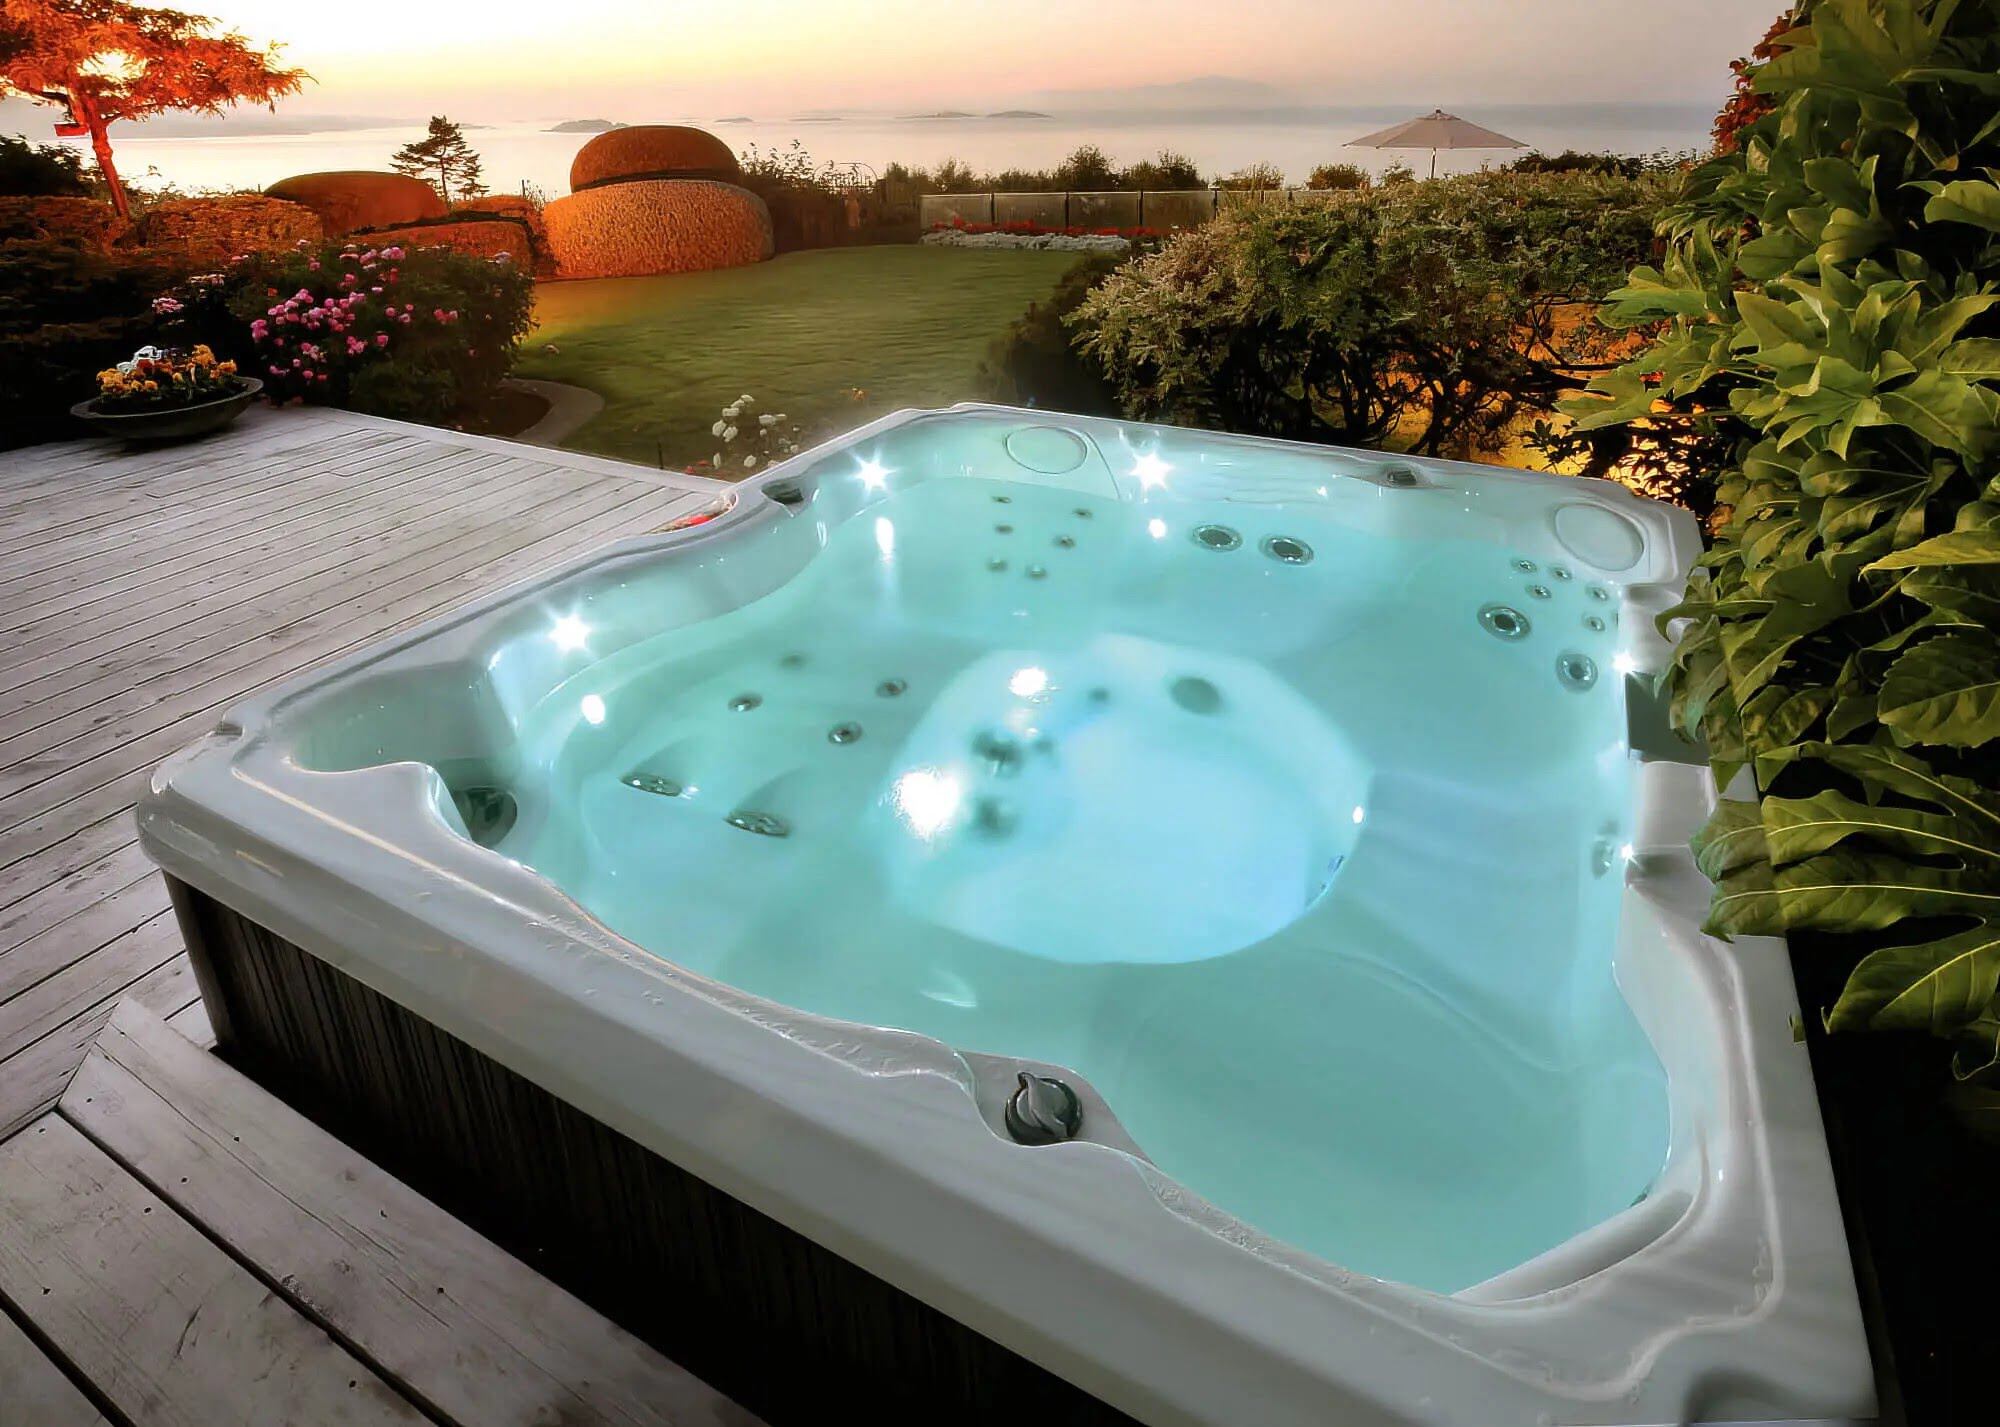 How To Set Up Hot Tub For The First Time